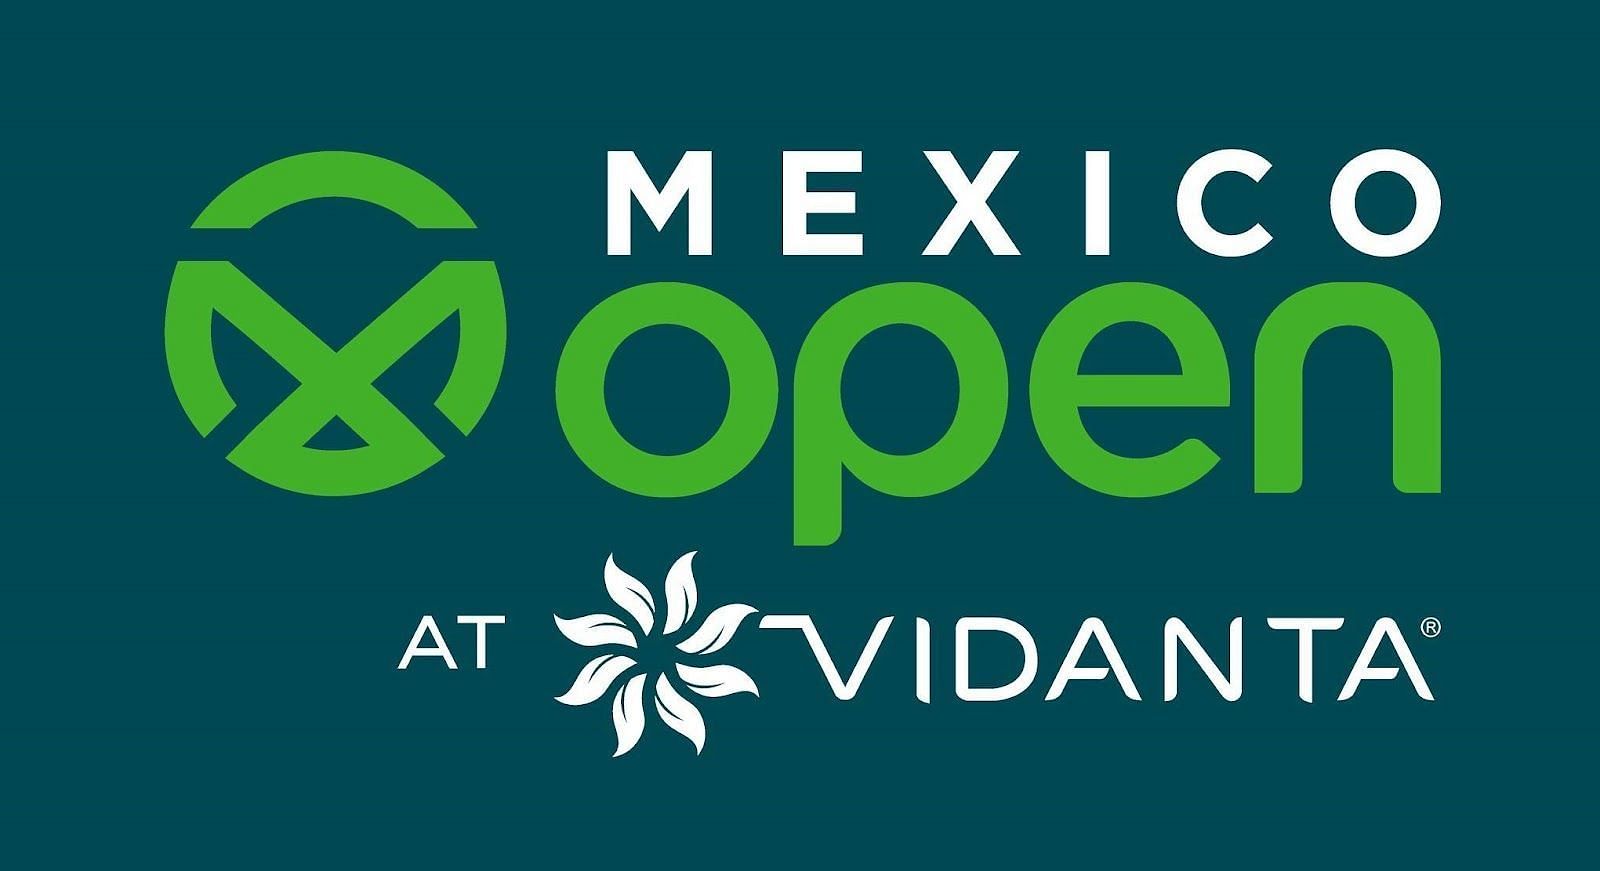 List of Players who won the PGA Mexico Open at Vidanta Year by Year